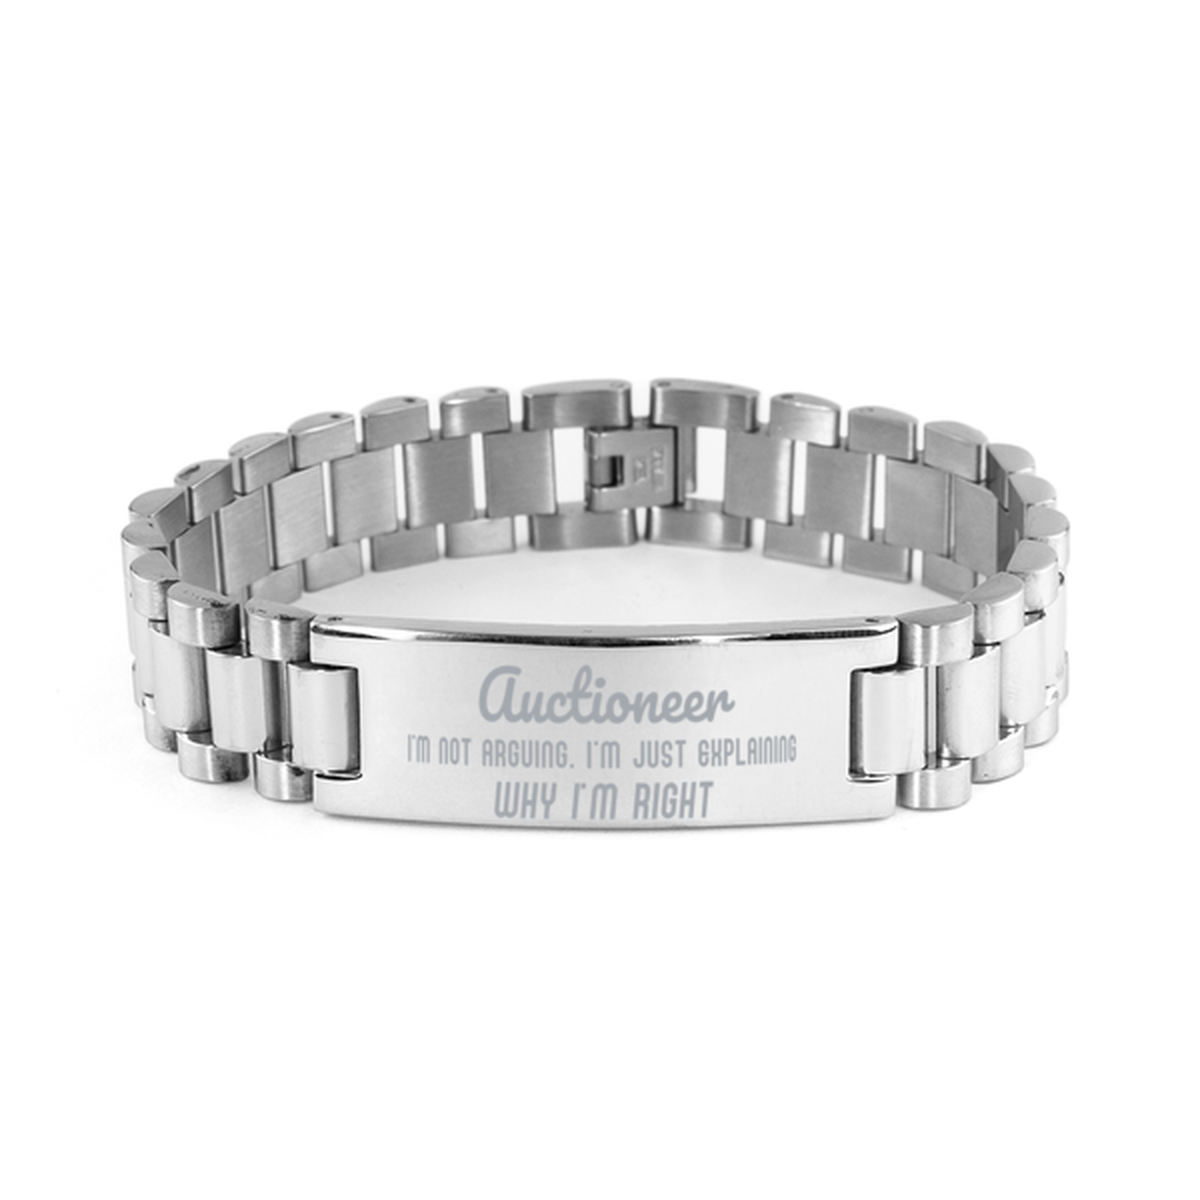 Auctioneer I'm not Arguing. I'm Just Explaining Why I'm RIGHT Ladder Stainless Steel Bracelet, Graduation Birthday Christmas Auctioneer Gifts For Auctioneer Funny Saying Quote Present for Men Women Coworker